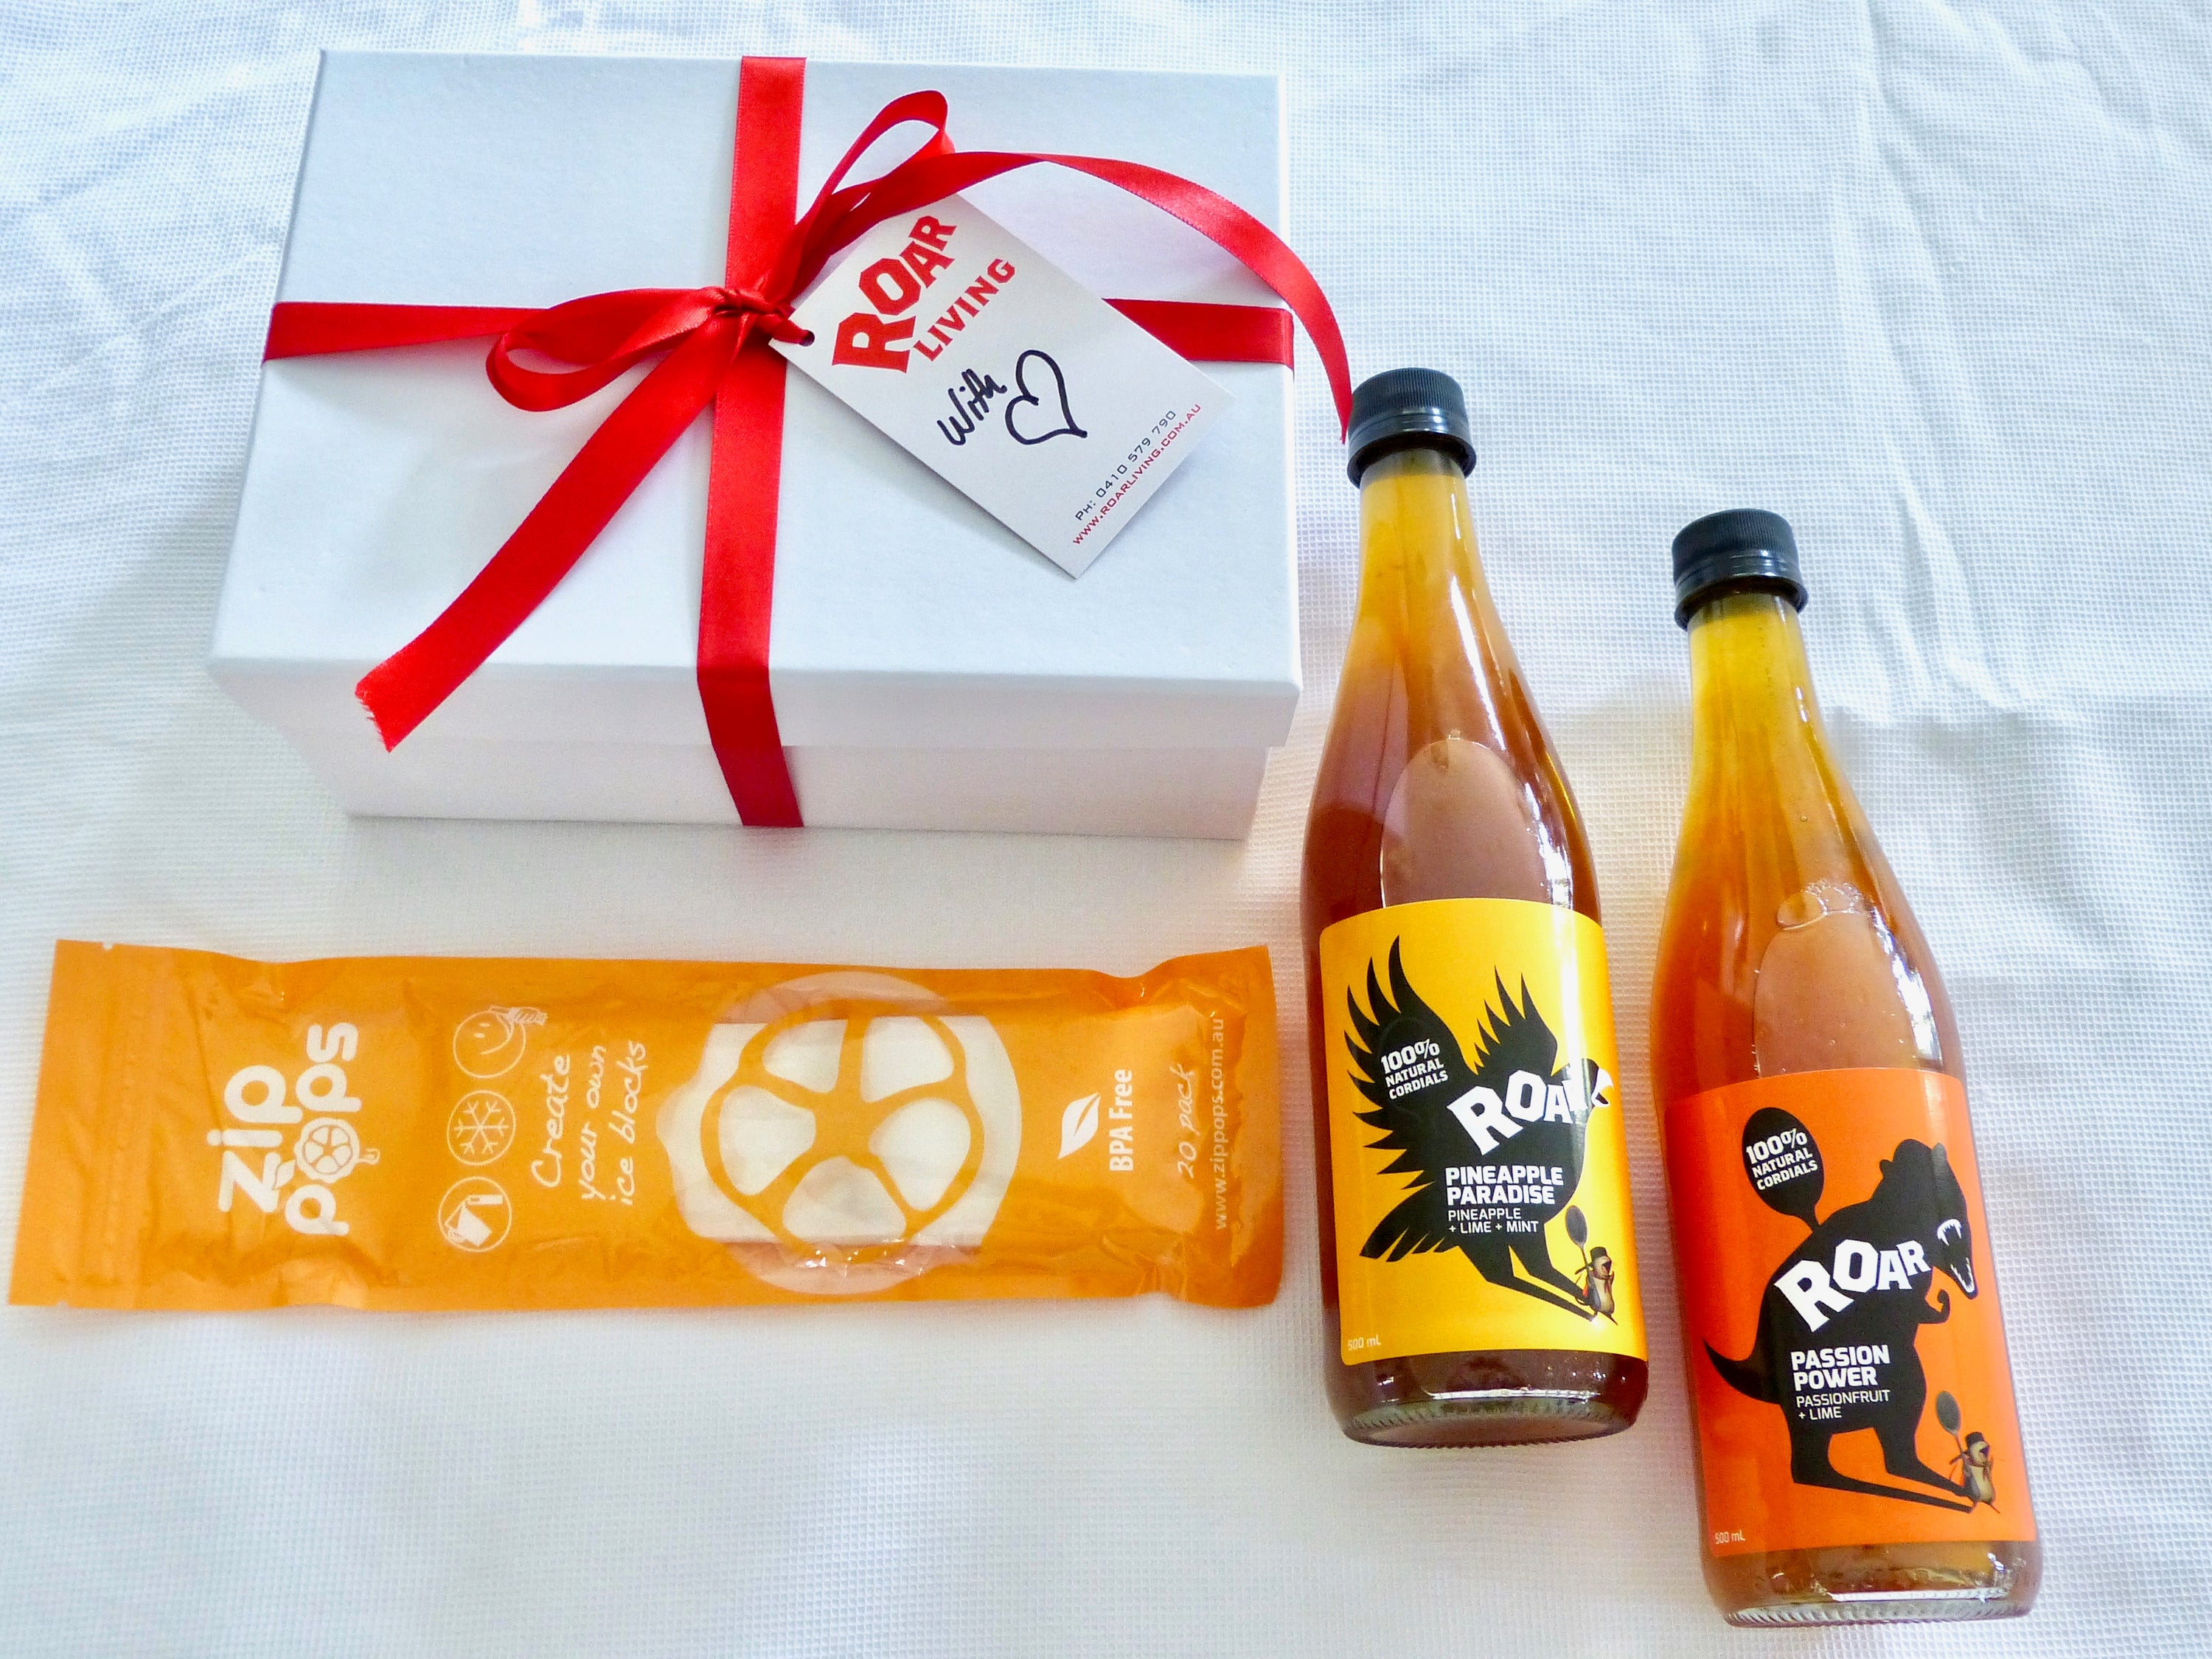 Natural cordial. Australian product. Pineapple Cordial. Passionfruit cordial. Tropical drink. Cocktail mixer. Iceblocks. Family gift.